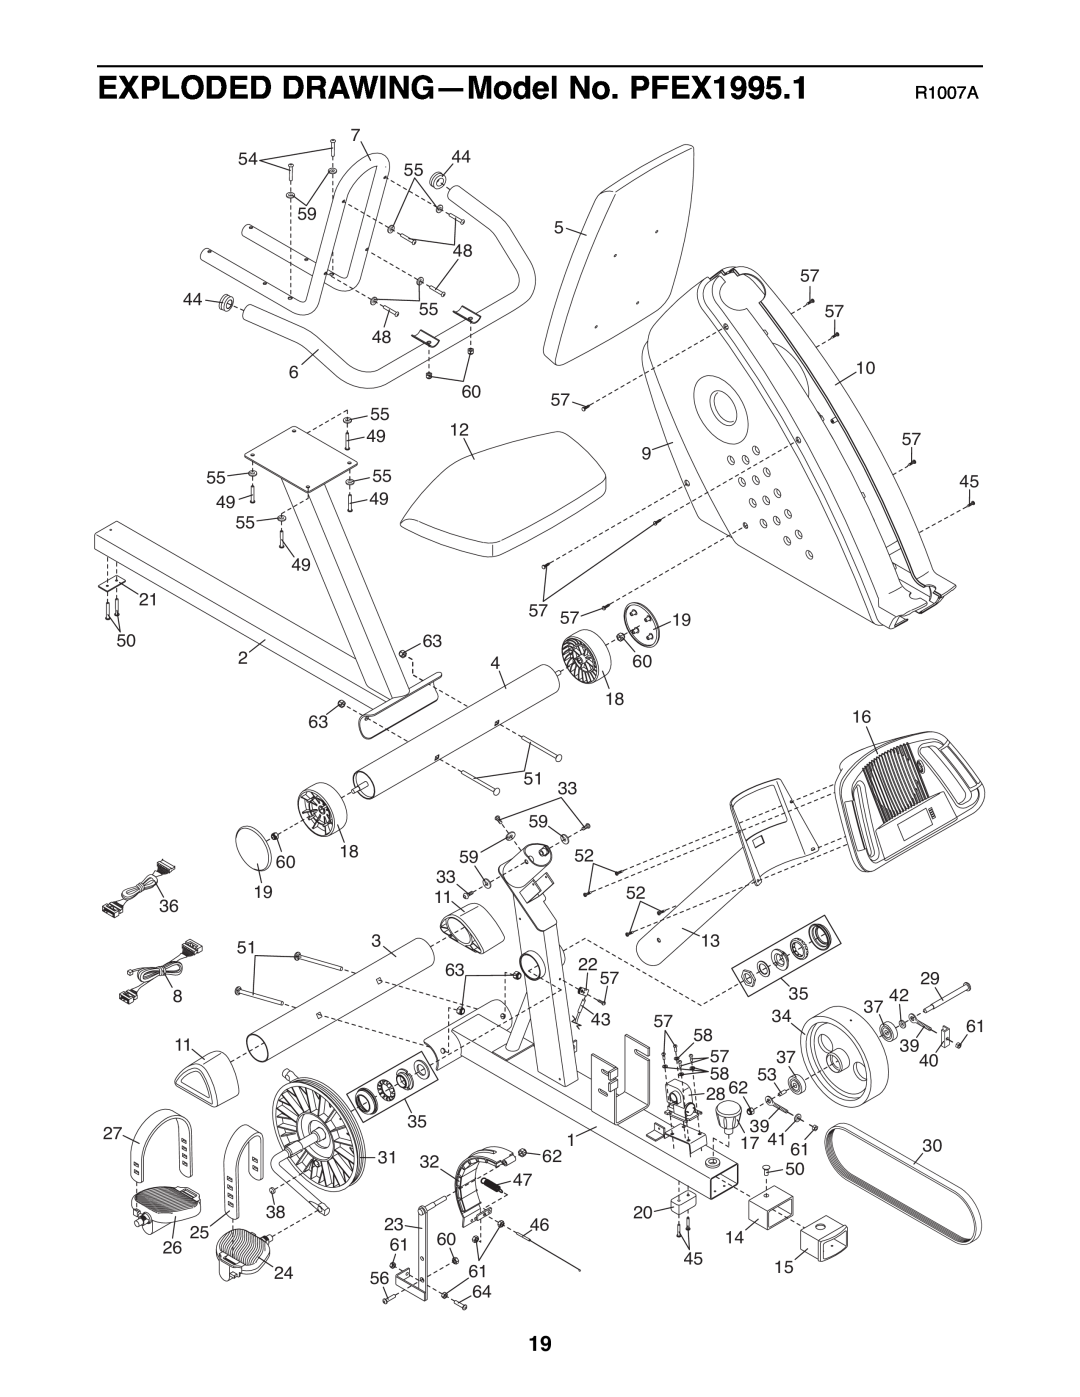 ProForm user manual EXPLODED DRAWING-Model No. PFEX1995.1, R1007A, 17 41 